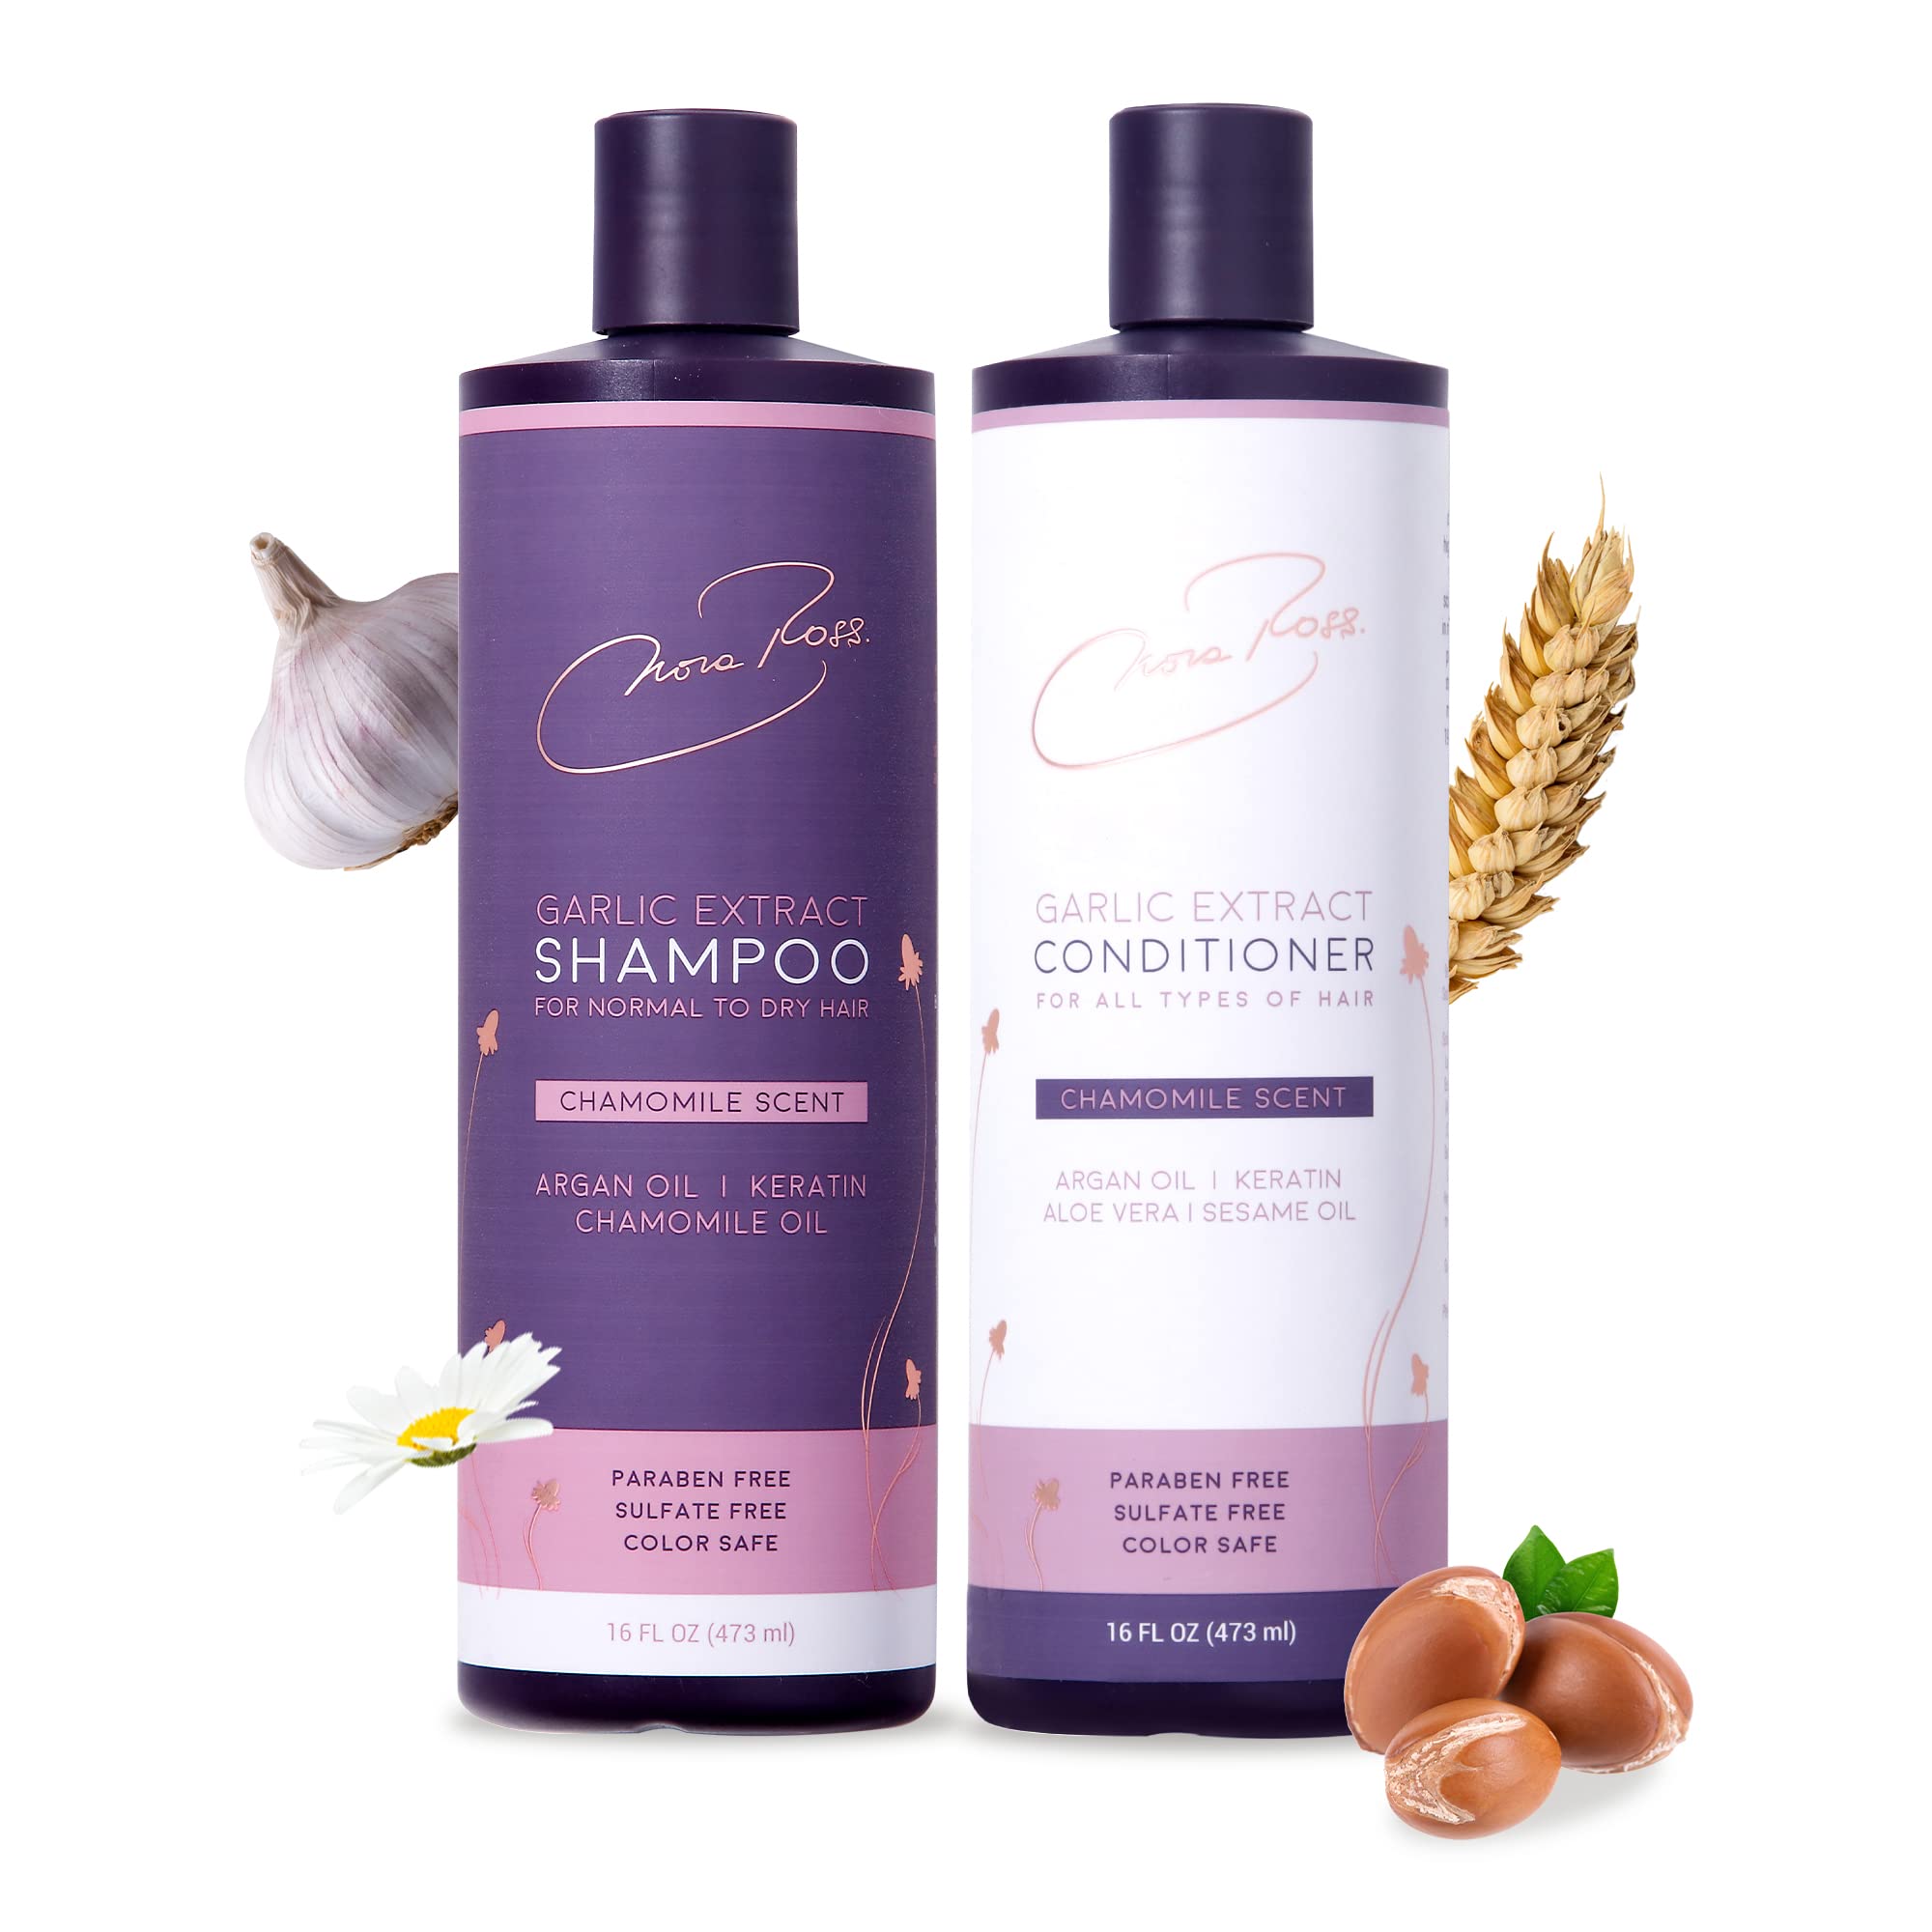 Nora Ross Garlic Shampoo & Conditioner for Normal to Dry Hair with Pleasant Chamomile Scent, Hair Thickening & Volumizing Shampoo, Clarifying Shampoo for Build Up with Keratin, Aloe Vera, Argan Oil & Wheat Amino Acids, 16 OZ